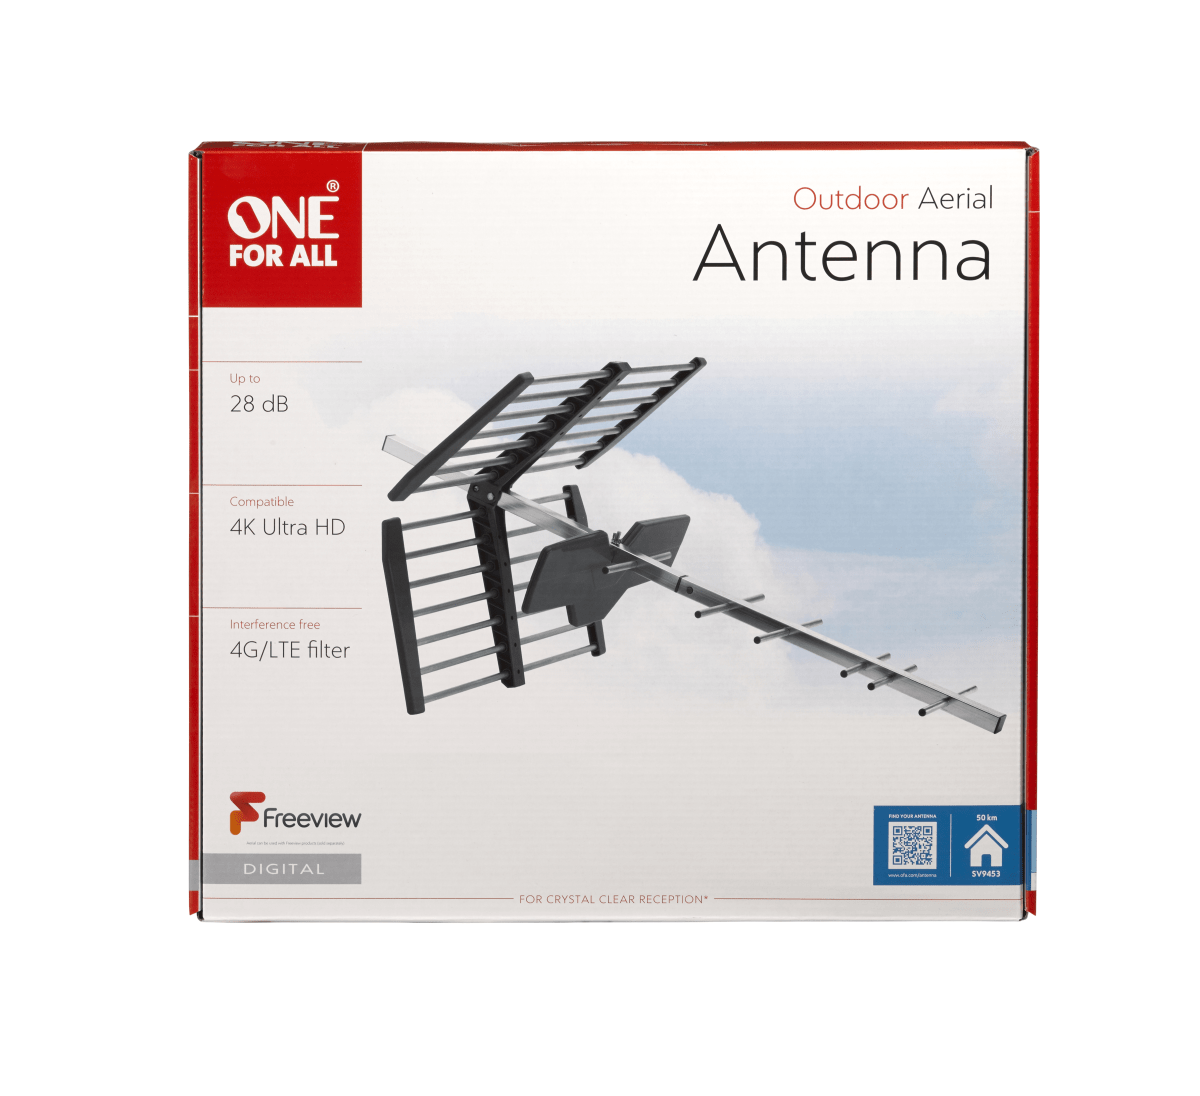 One for All Outdoor Antenna DVB-T 24dB SV 9453 antena